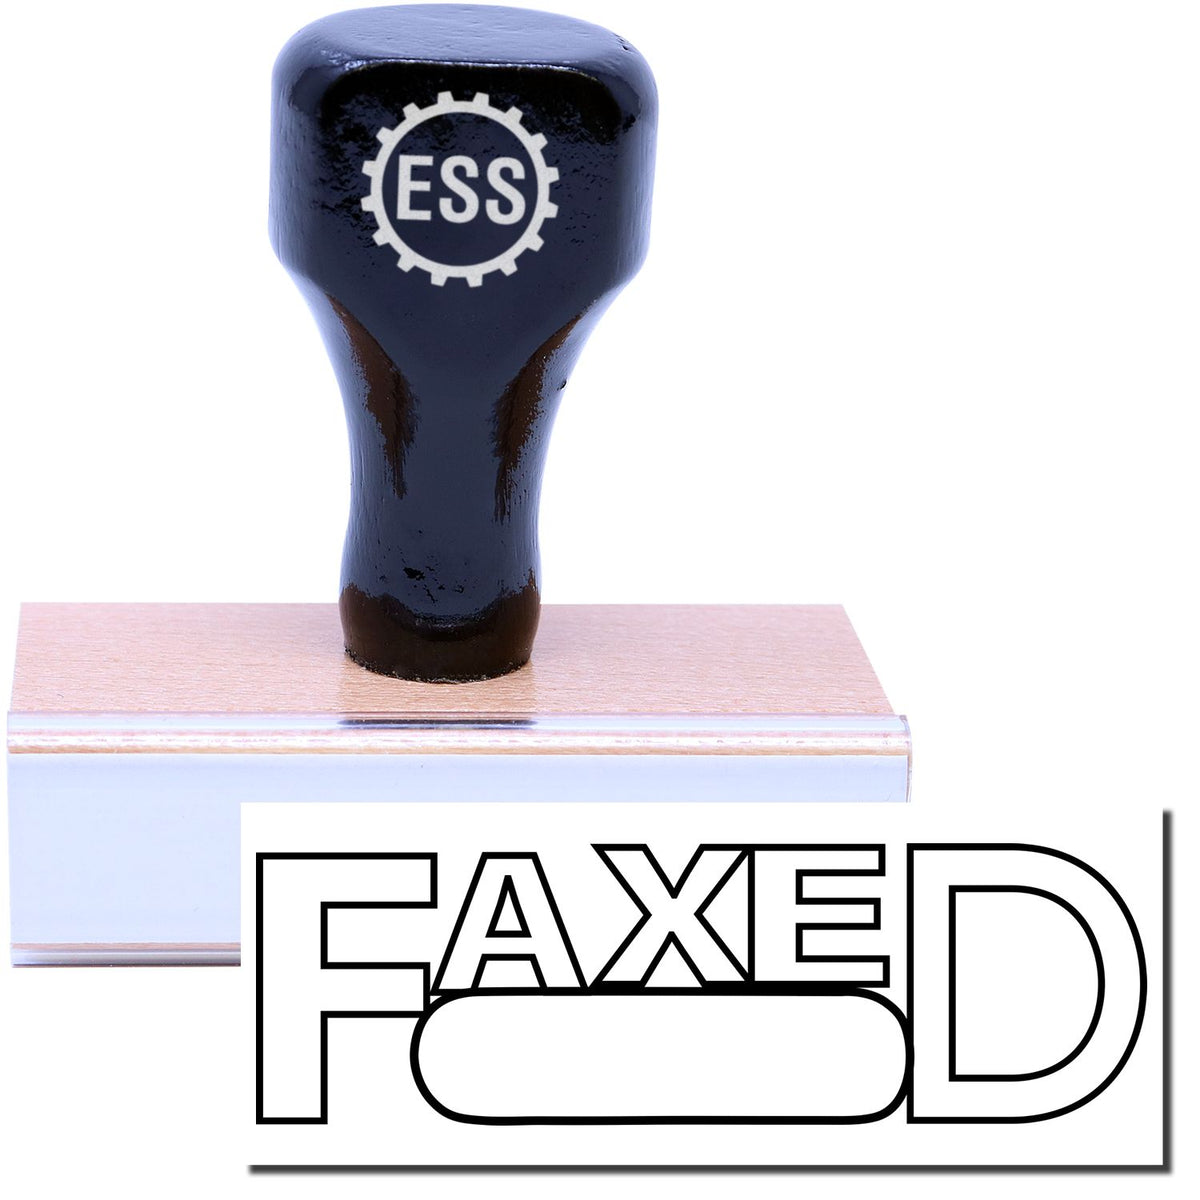 A stock office rubber stamp with a stamped image showing how the text &quot;FAXED&quot; in a large font with a round date box is displayed after stamping.